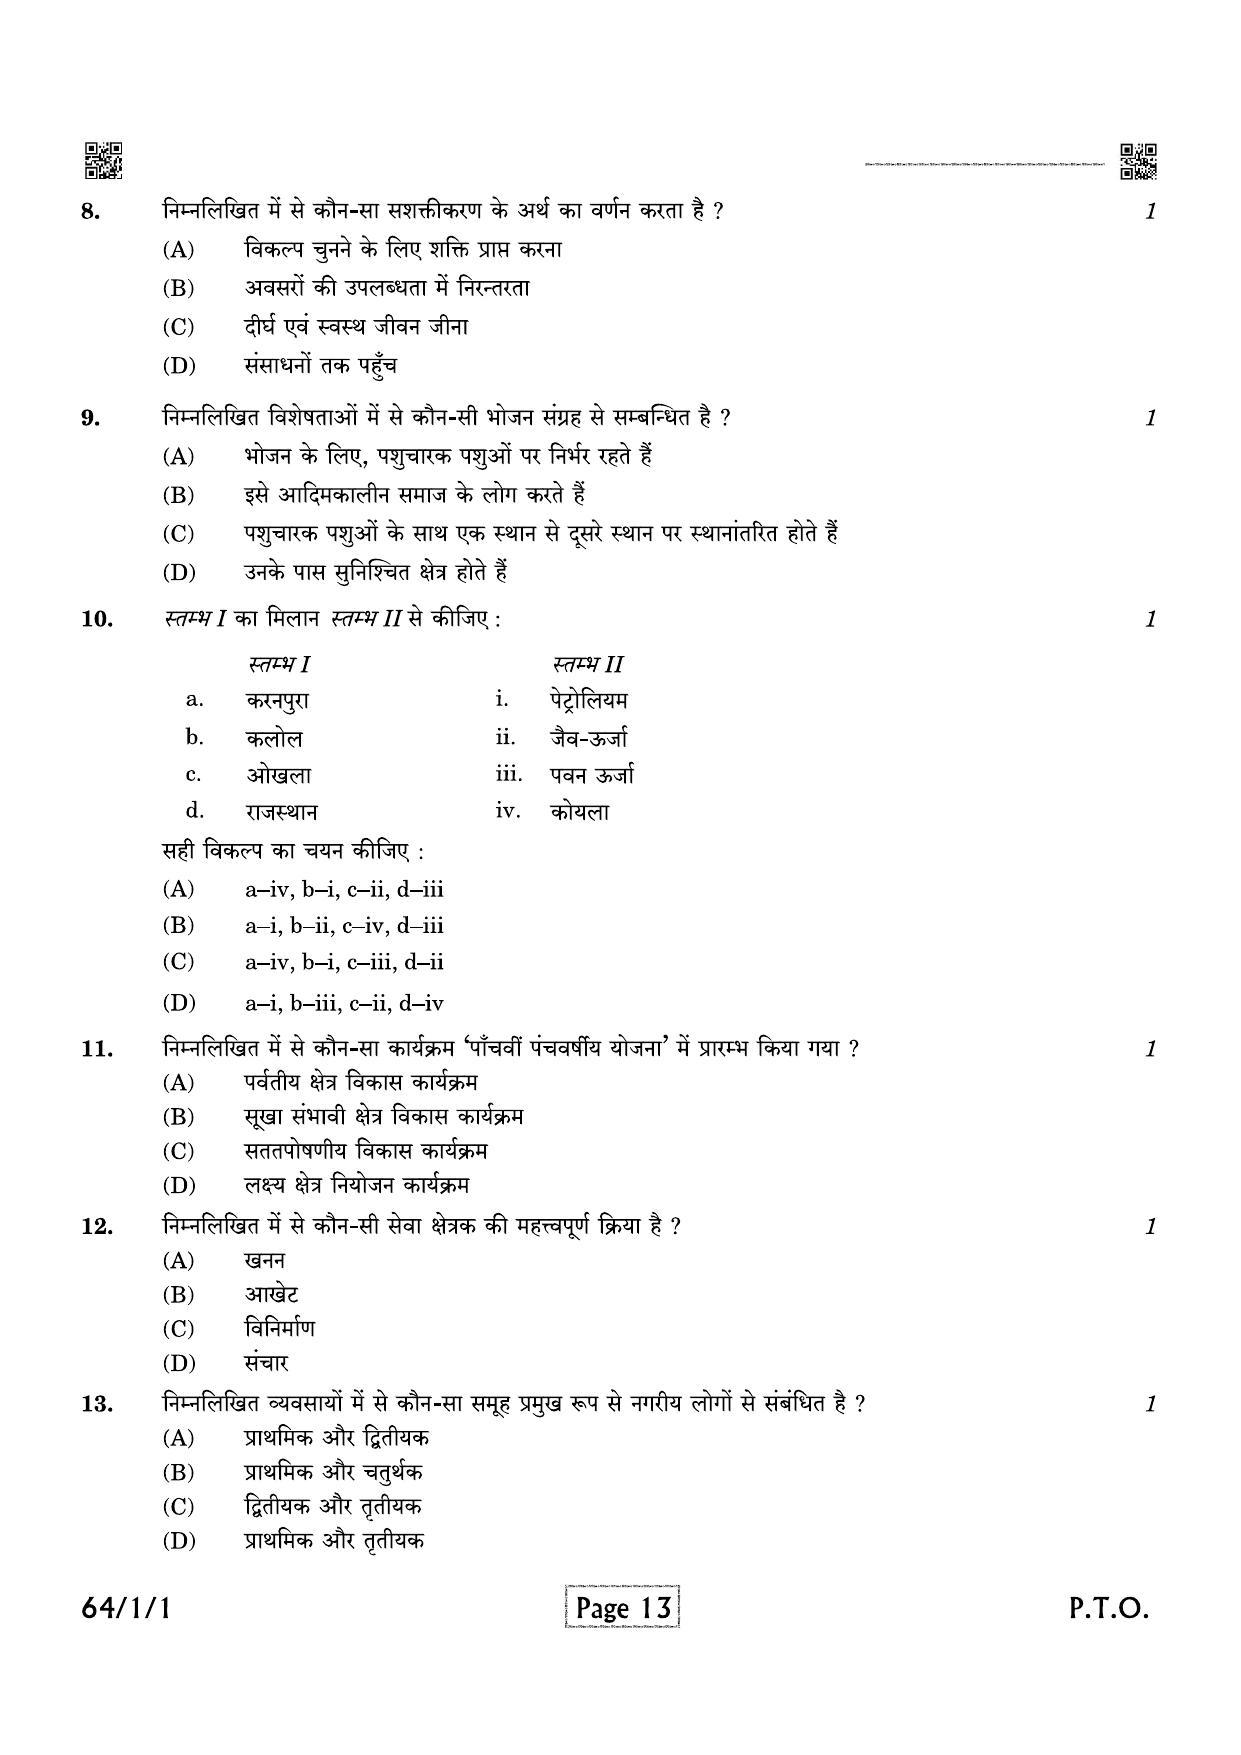 CBSE Class 12 QP_029_Geography 2021 Compartment Question Paper - Page 13